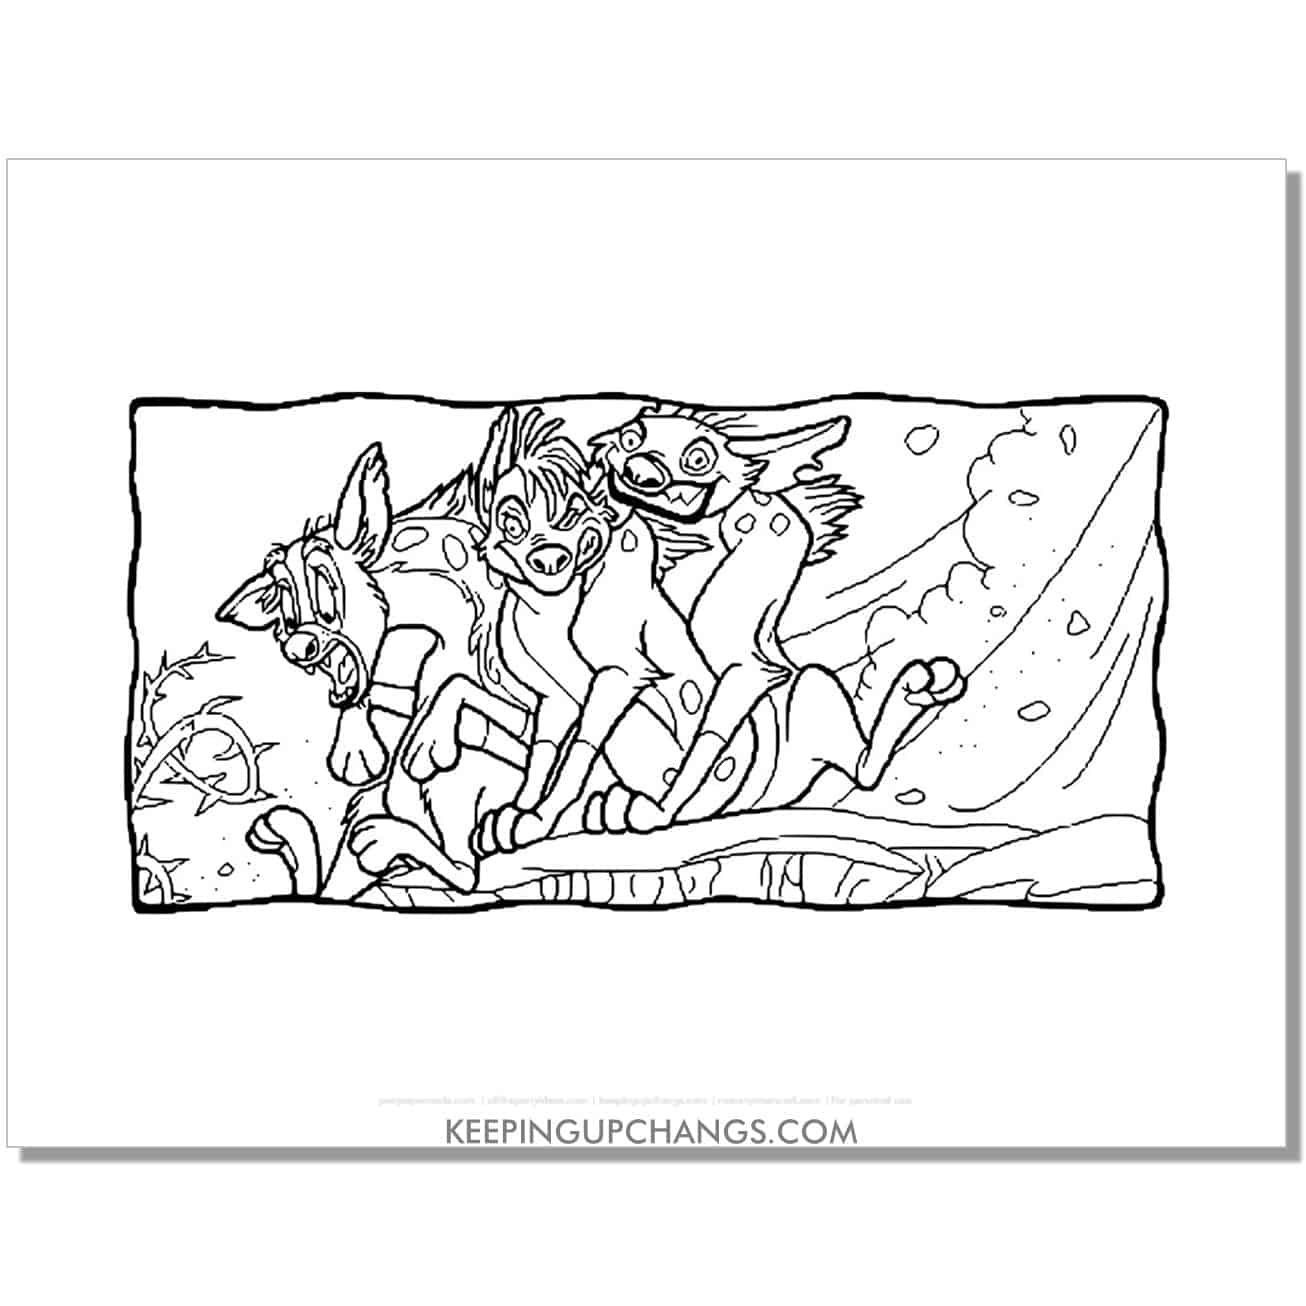 hyenas about to fall off cliff lion king coloring page, sheet.